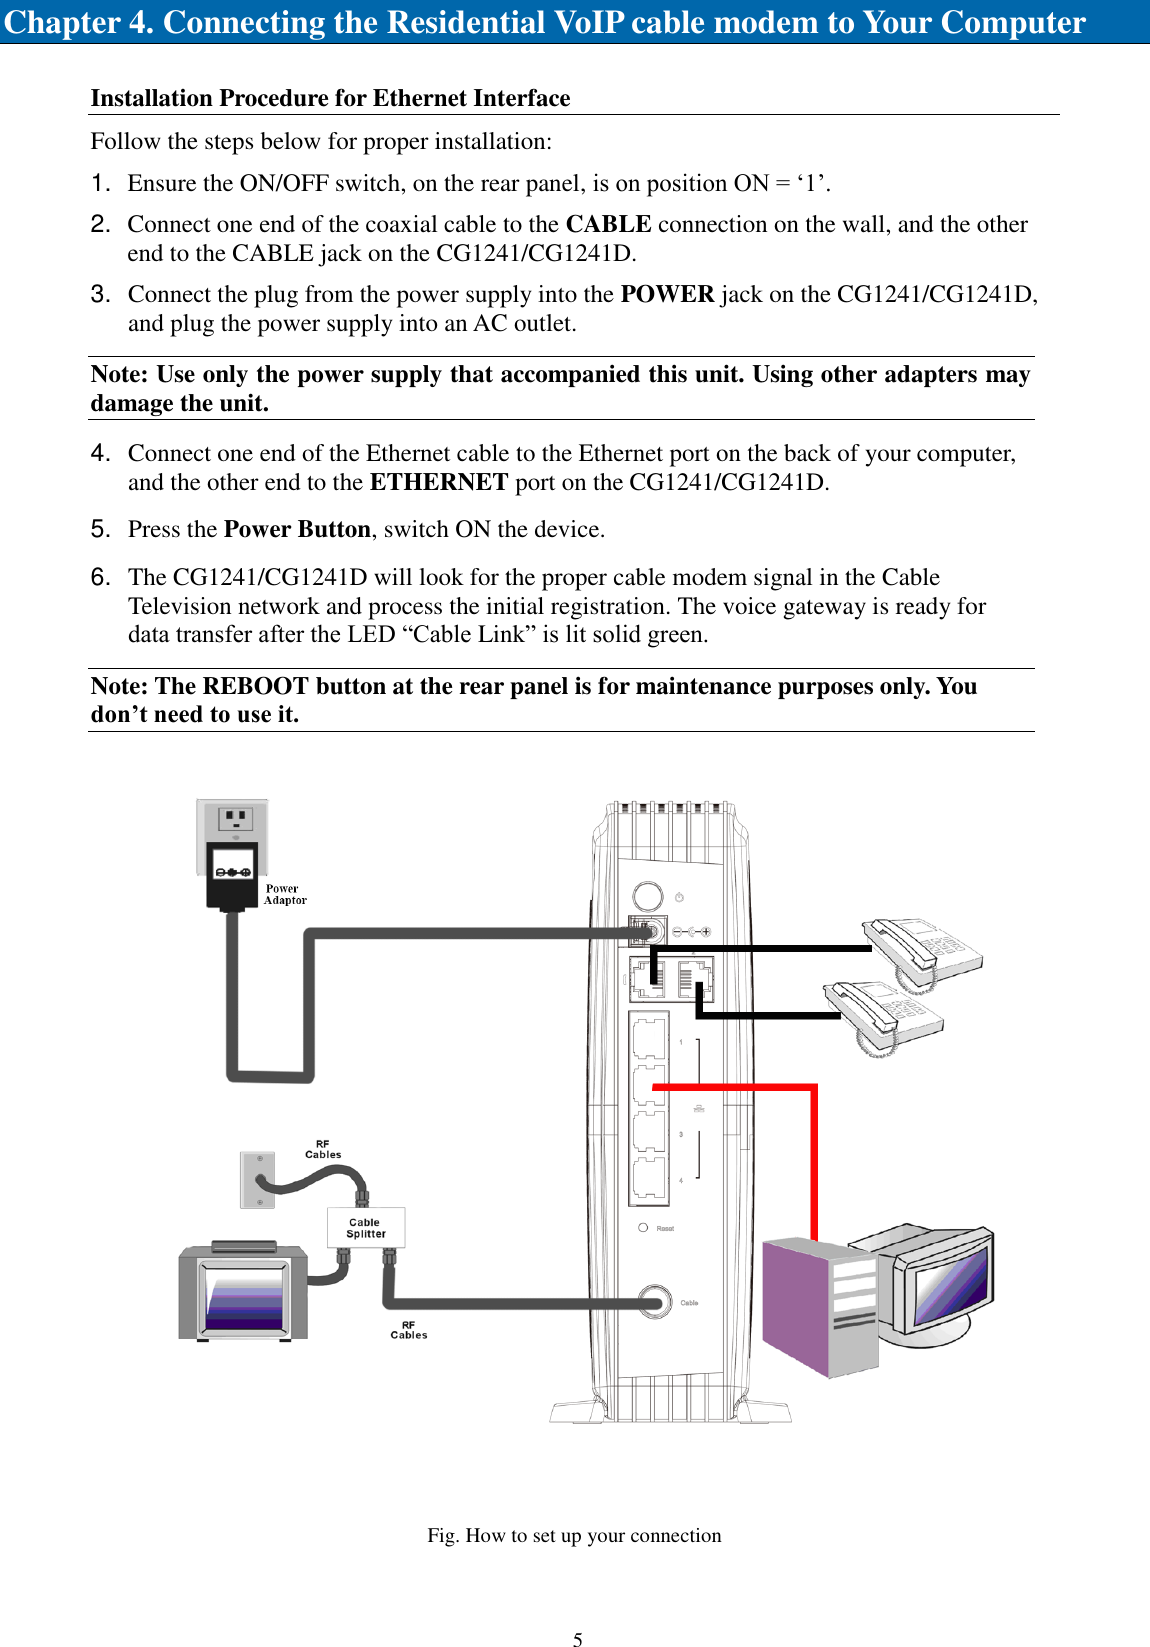    5   Chapter 4. Connecting the Residential VoIP cable modem to Your Computer Installation Procedure for Ethernet Interface Follow the steps below for proper installation: 1. Ensure the ON/OFF switch, on the rear panel, is on position ON = ‘1’. 2. Connect one end of the coaxial cable to the CABLE connection on the wall, and the other end to the CABLE jack on the CG1241/CG1241D. 3. Connect the plug from the power supply into the POWER jack on the CG1241/CG1241D, and plug the power supply into an AC outlet. Note: Use only the power supply that accompanied this unit. Using other adapters may damage the unit. 4. Connect one end of the Ethernet cable to the Ethernet port on the back of your computer, and the other end to the ETHERNET port on the CG1241/CG1241D. 5. Press the Power Button, switch ON the device. 6. The CG1241/CG1241D will look for the proper cable modem signal in the Cable Television network and process the initial registration. The voice gateway is ready for data transfer after the LED “Cable Link” is lit solid green. Note: The REBOOT button at the rear panel is for maintenance purposes only. You don’t need to use it.  Fig. How to set up your connection 